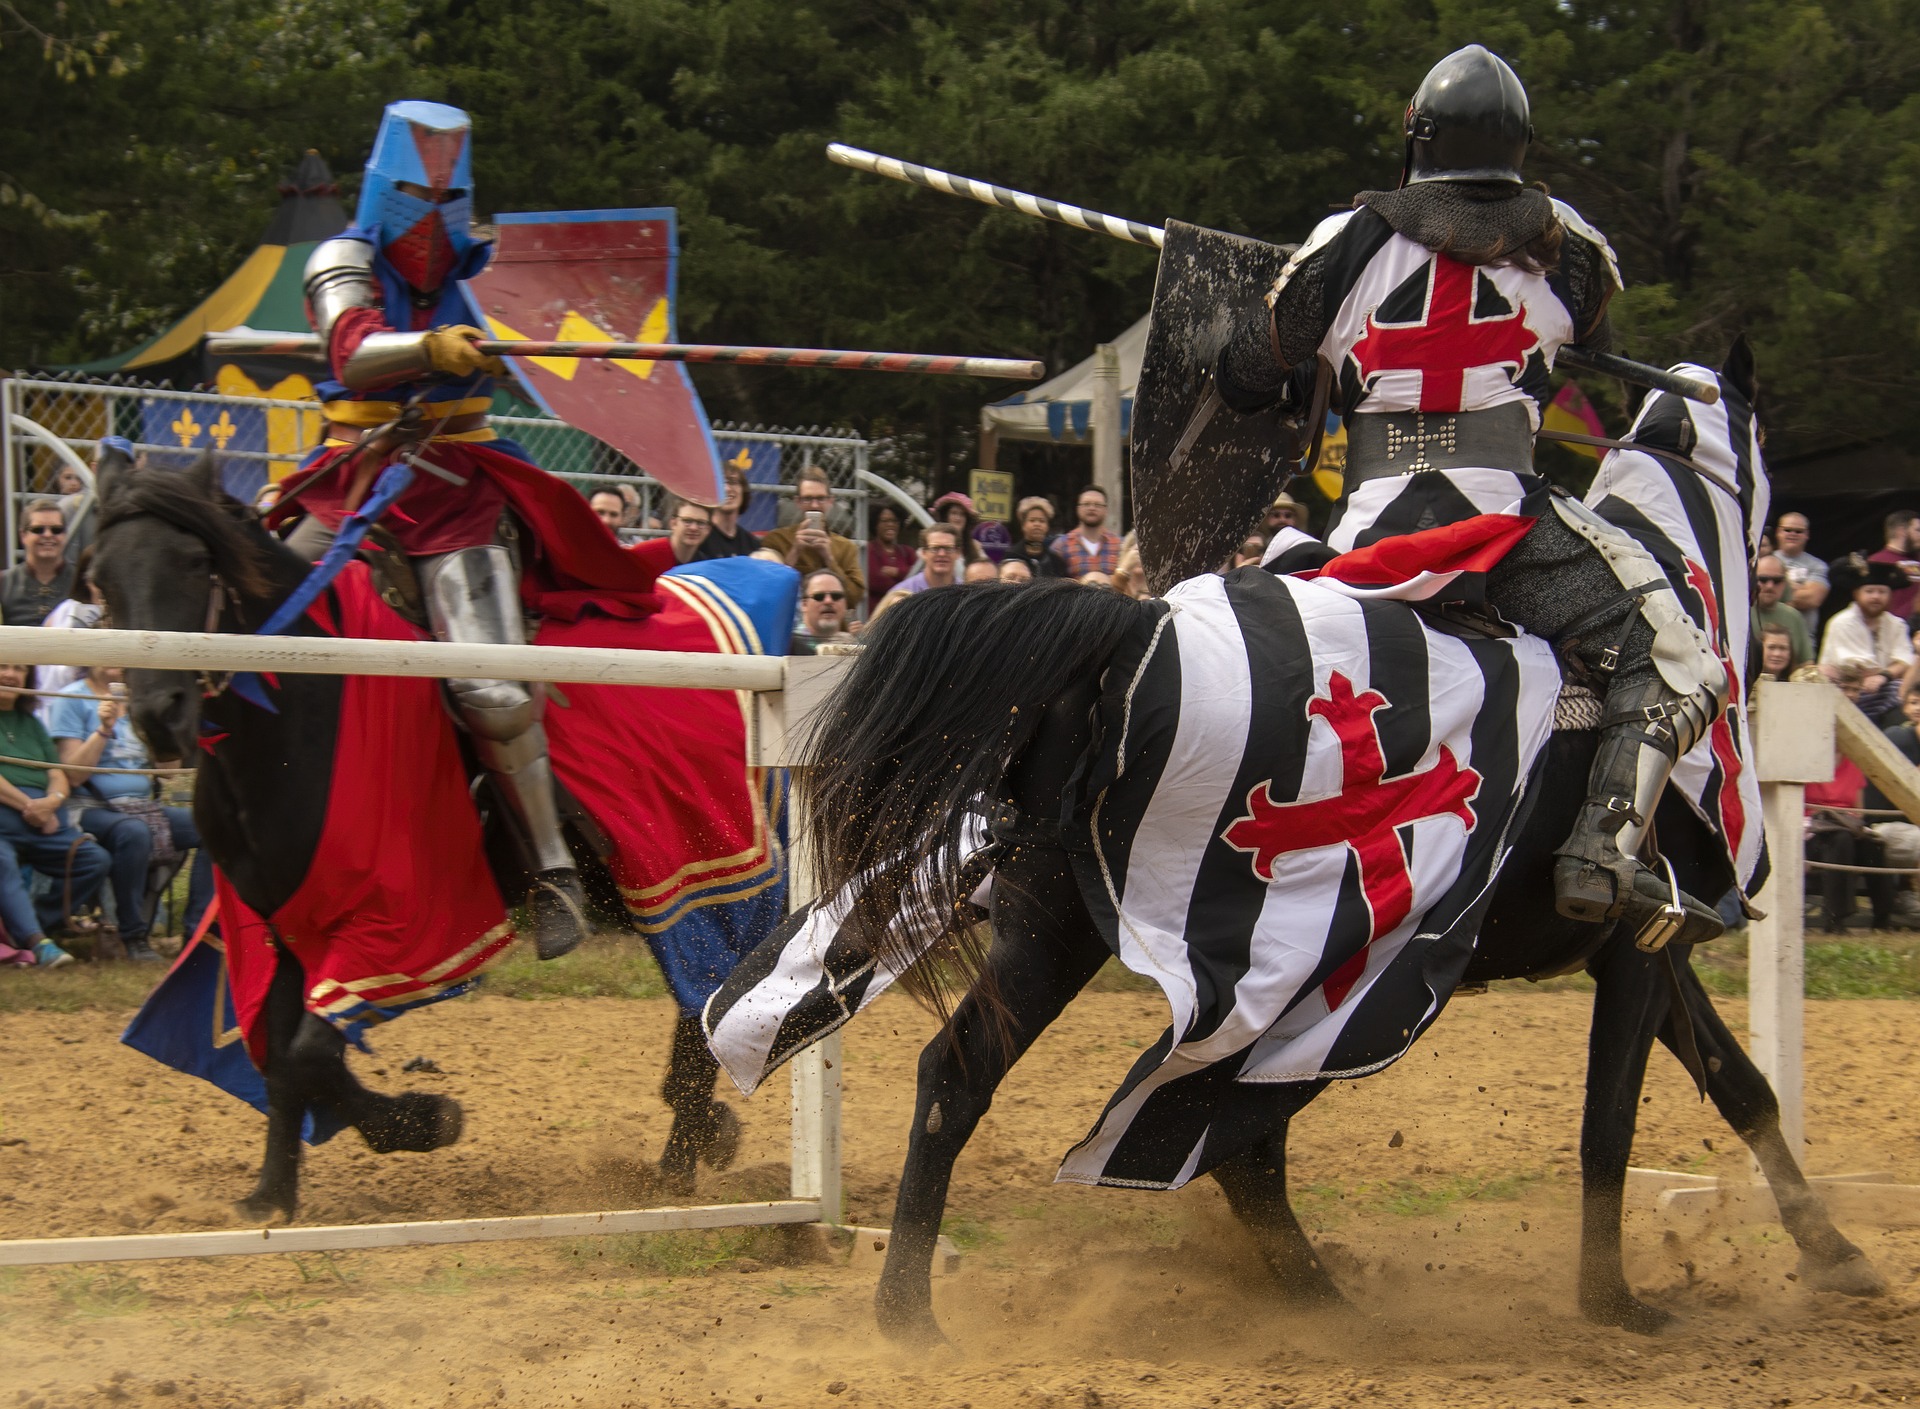 The 2022 Brevard Renaissance Fair will transport you back in time